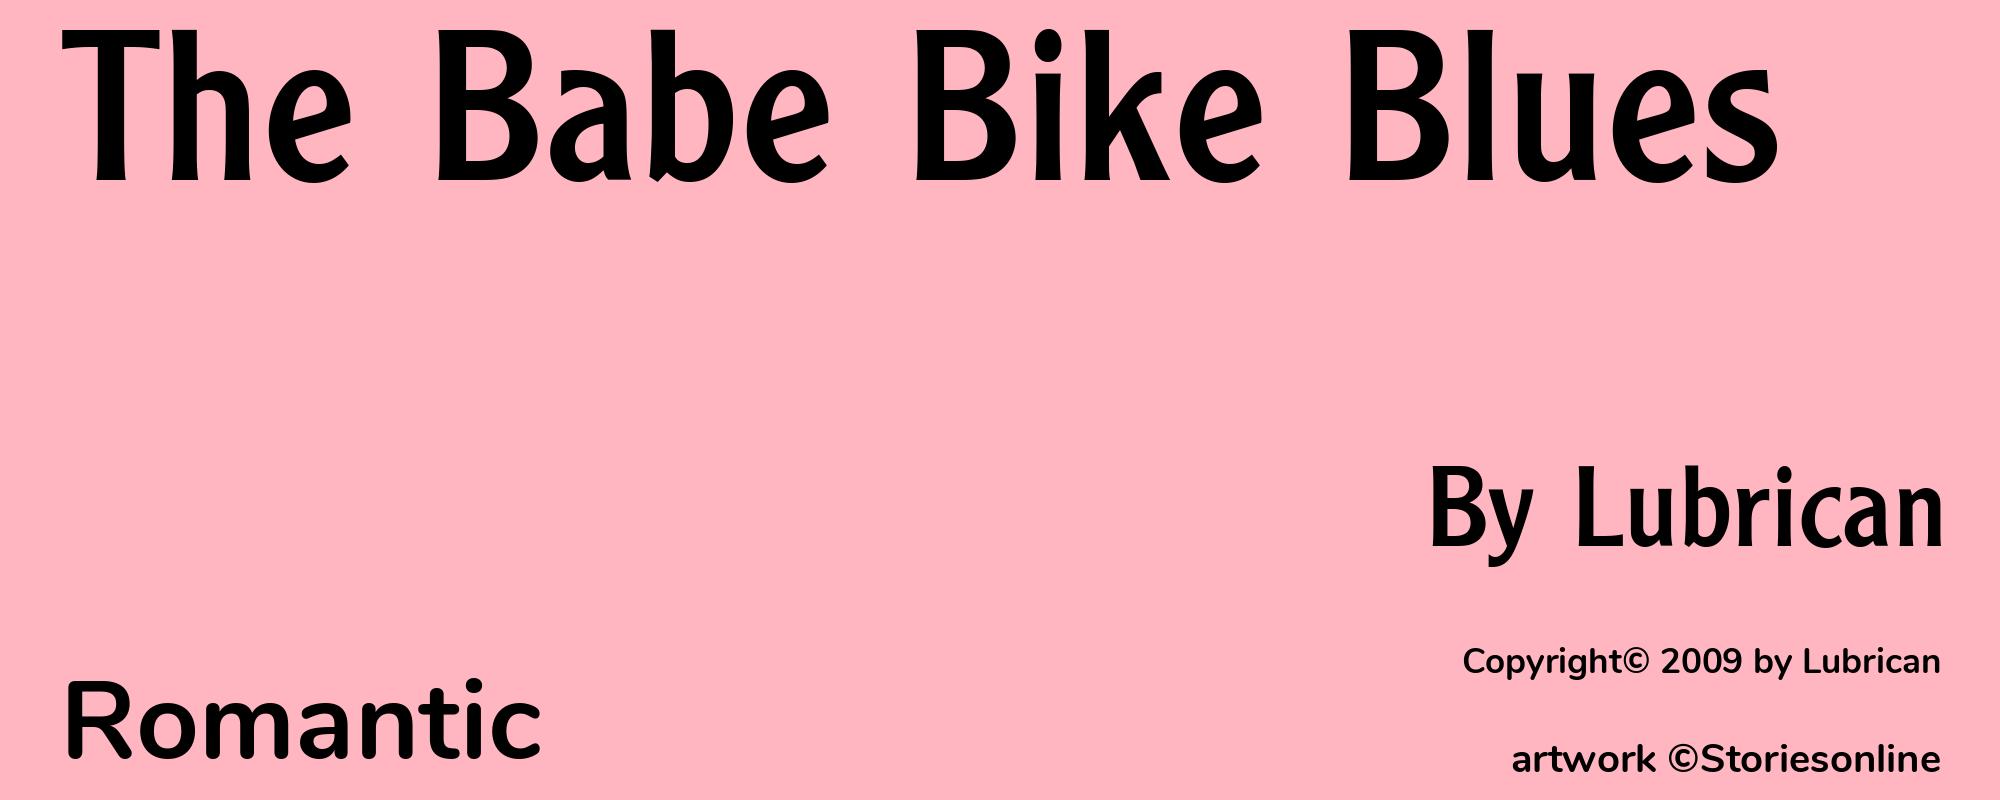 The Babe Bike Blues - Cover